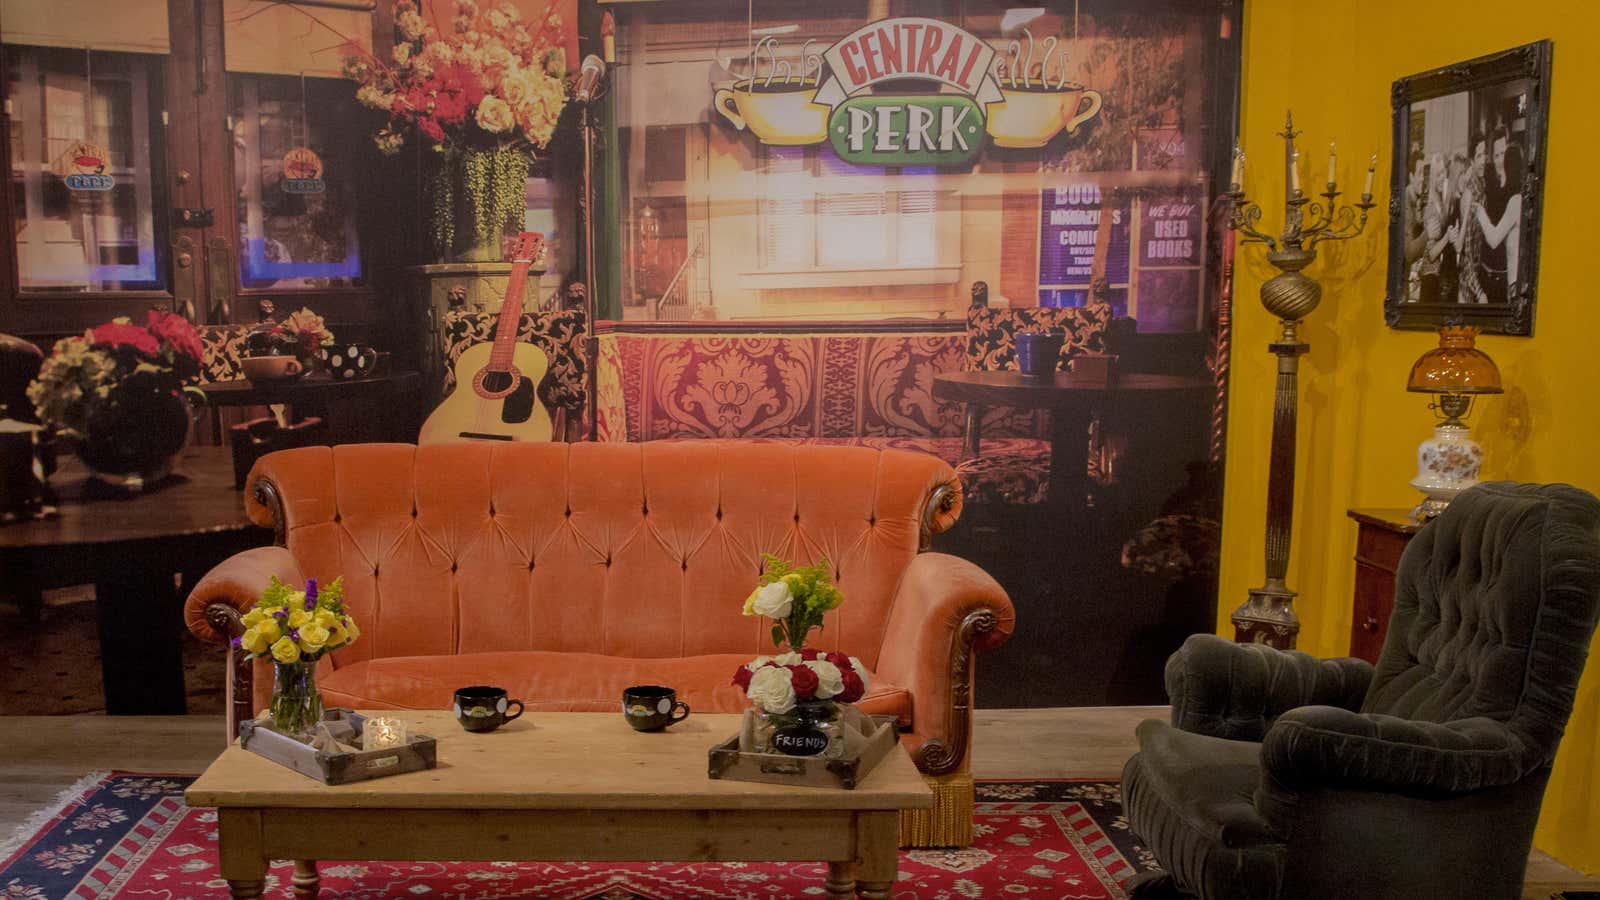 Central Perk might not be empty for long.